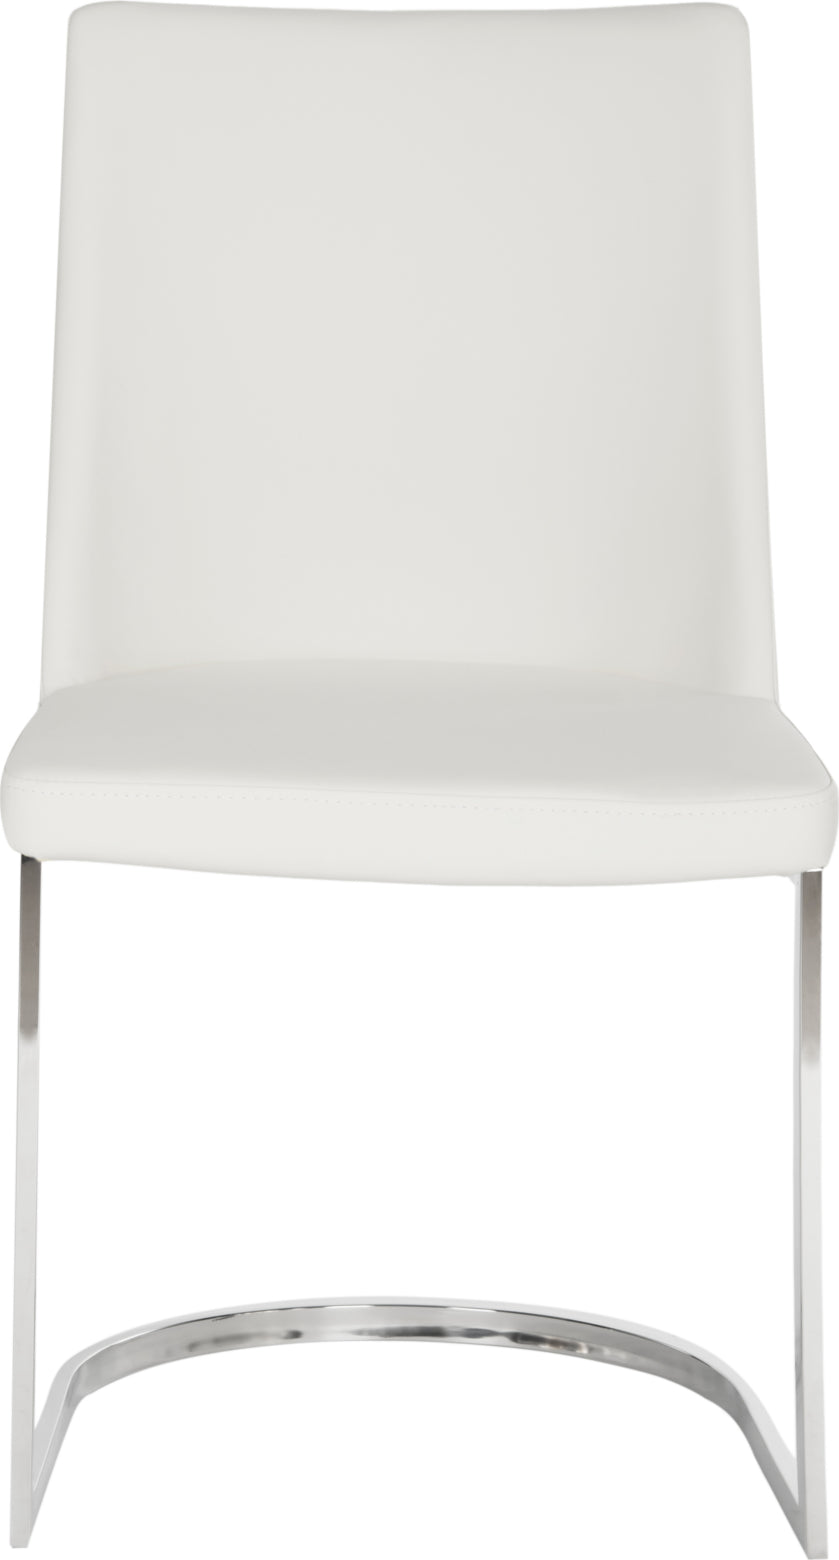 Safavieh Parkston 18''H Leather Side Chair White and Chrome Furniture main image